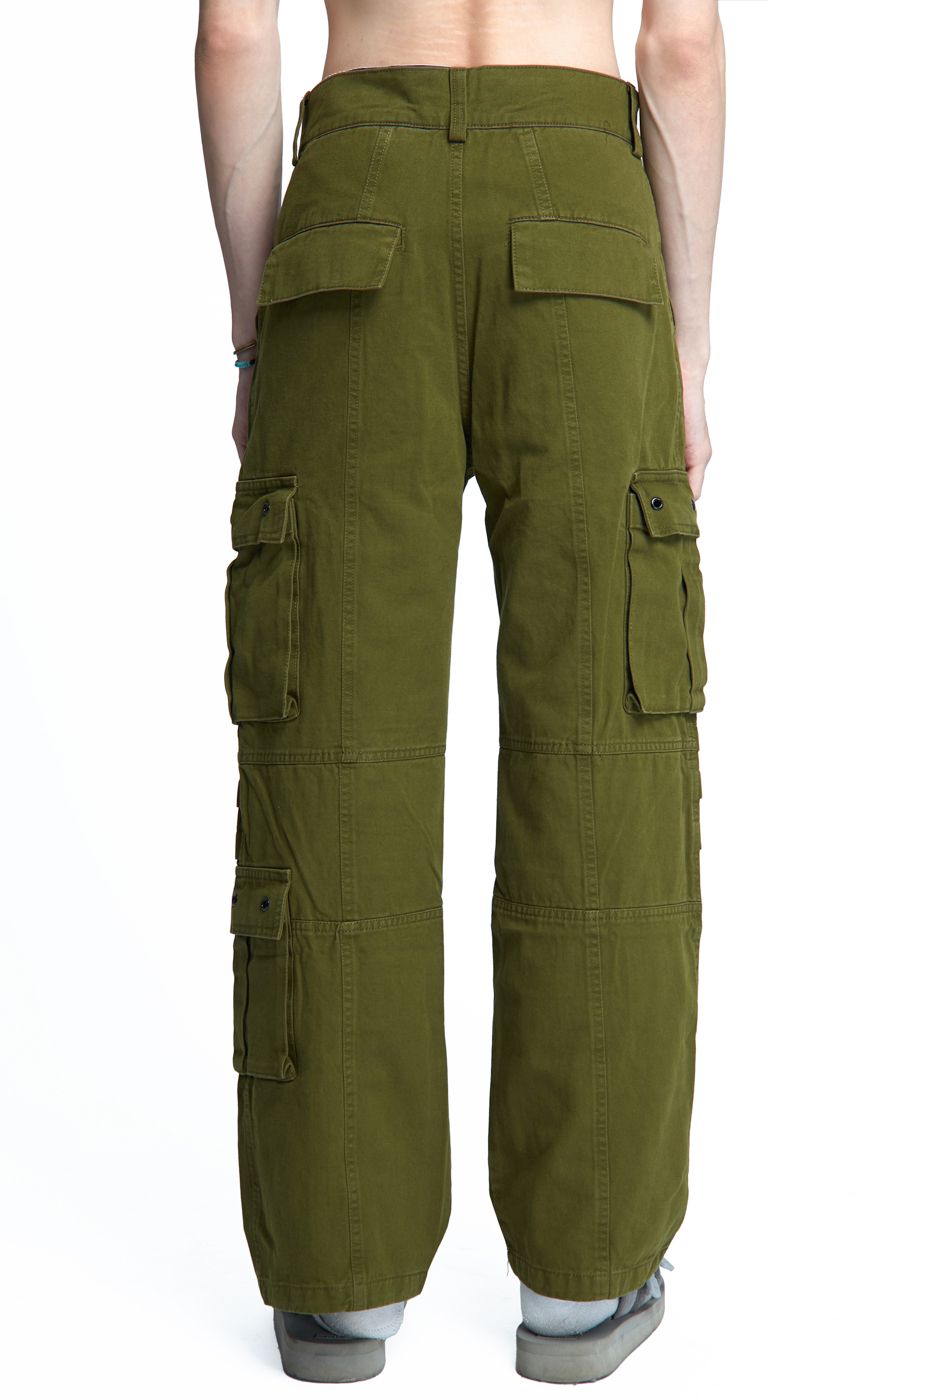  3P OFFONOFF CARGO PANT/OLIVE 